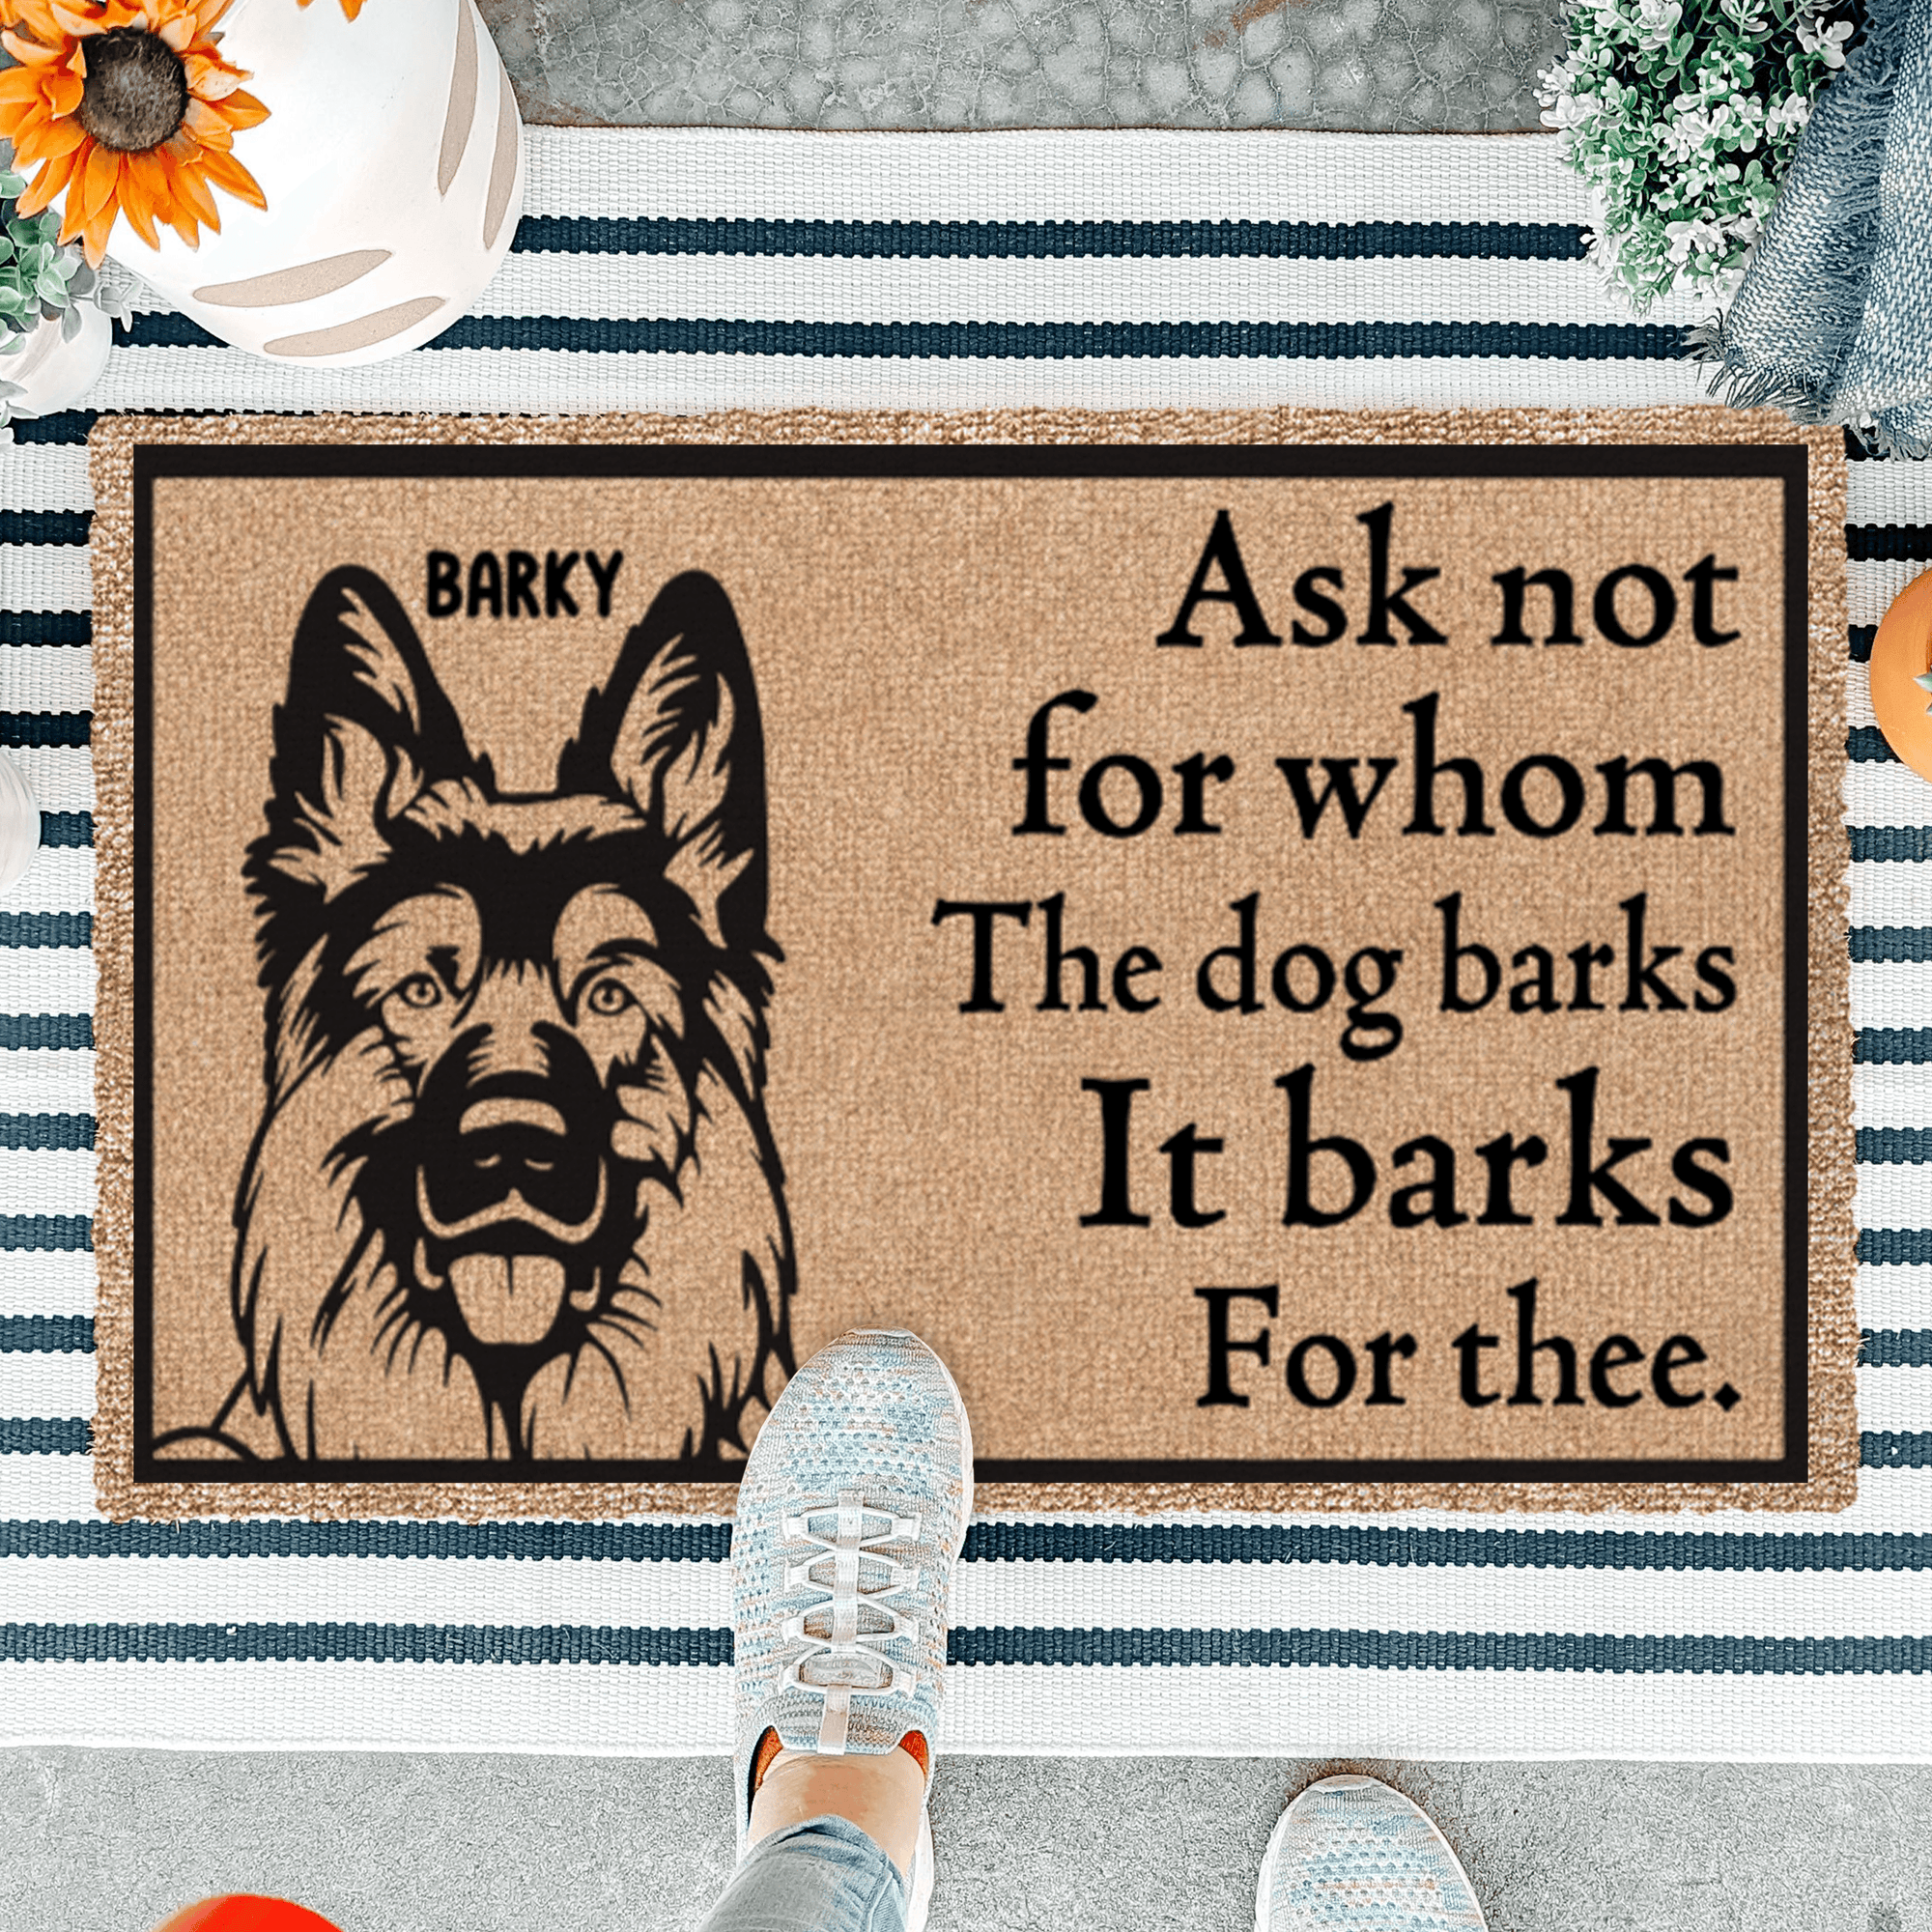 Ask Not Whom The Dog Barks For. It Barks For Thee - Personalized Doormat - Birthday, Housewarming, Funny Gift for Homeowners, Friends, Dog Mom, Dog Dad, Dog Lovers, Pet Gifts for Him, Her